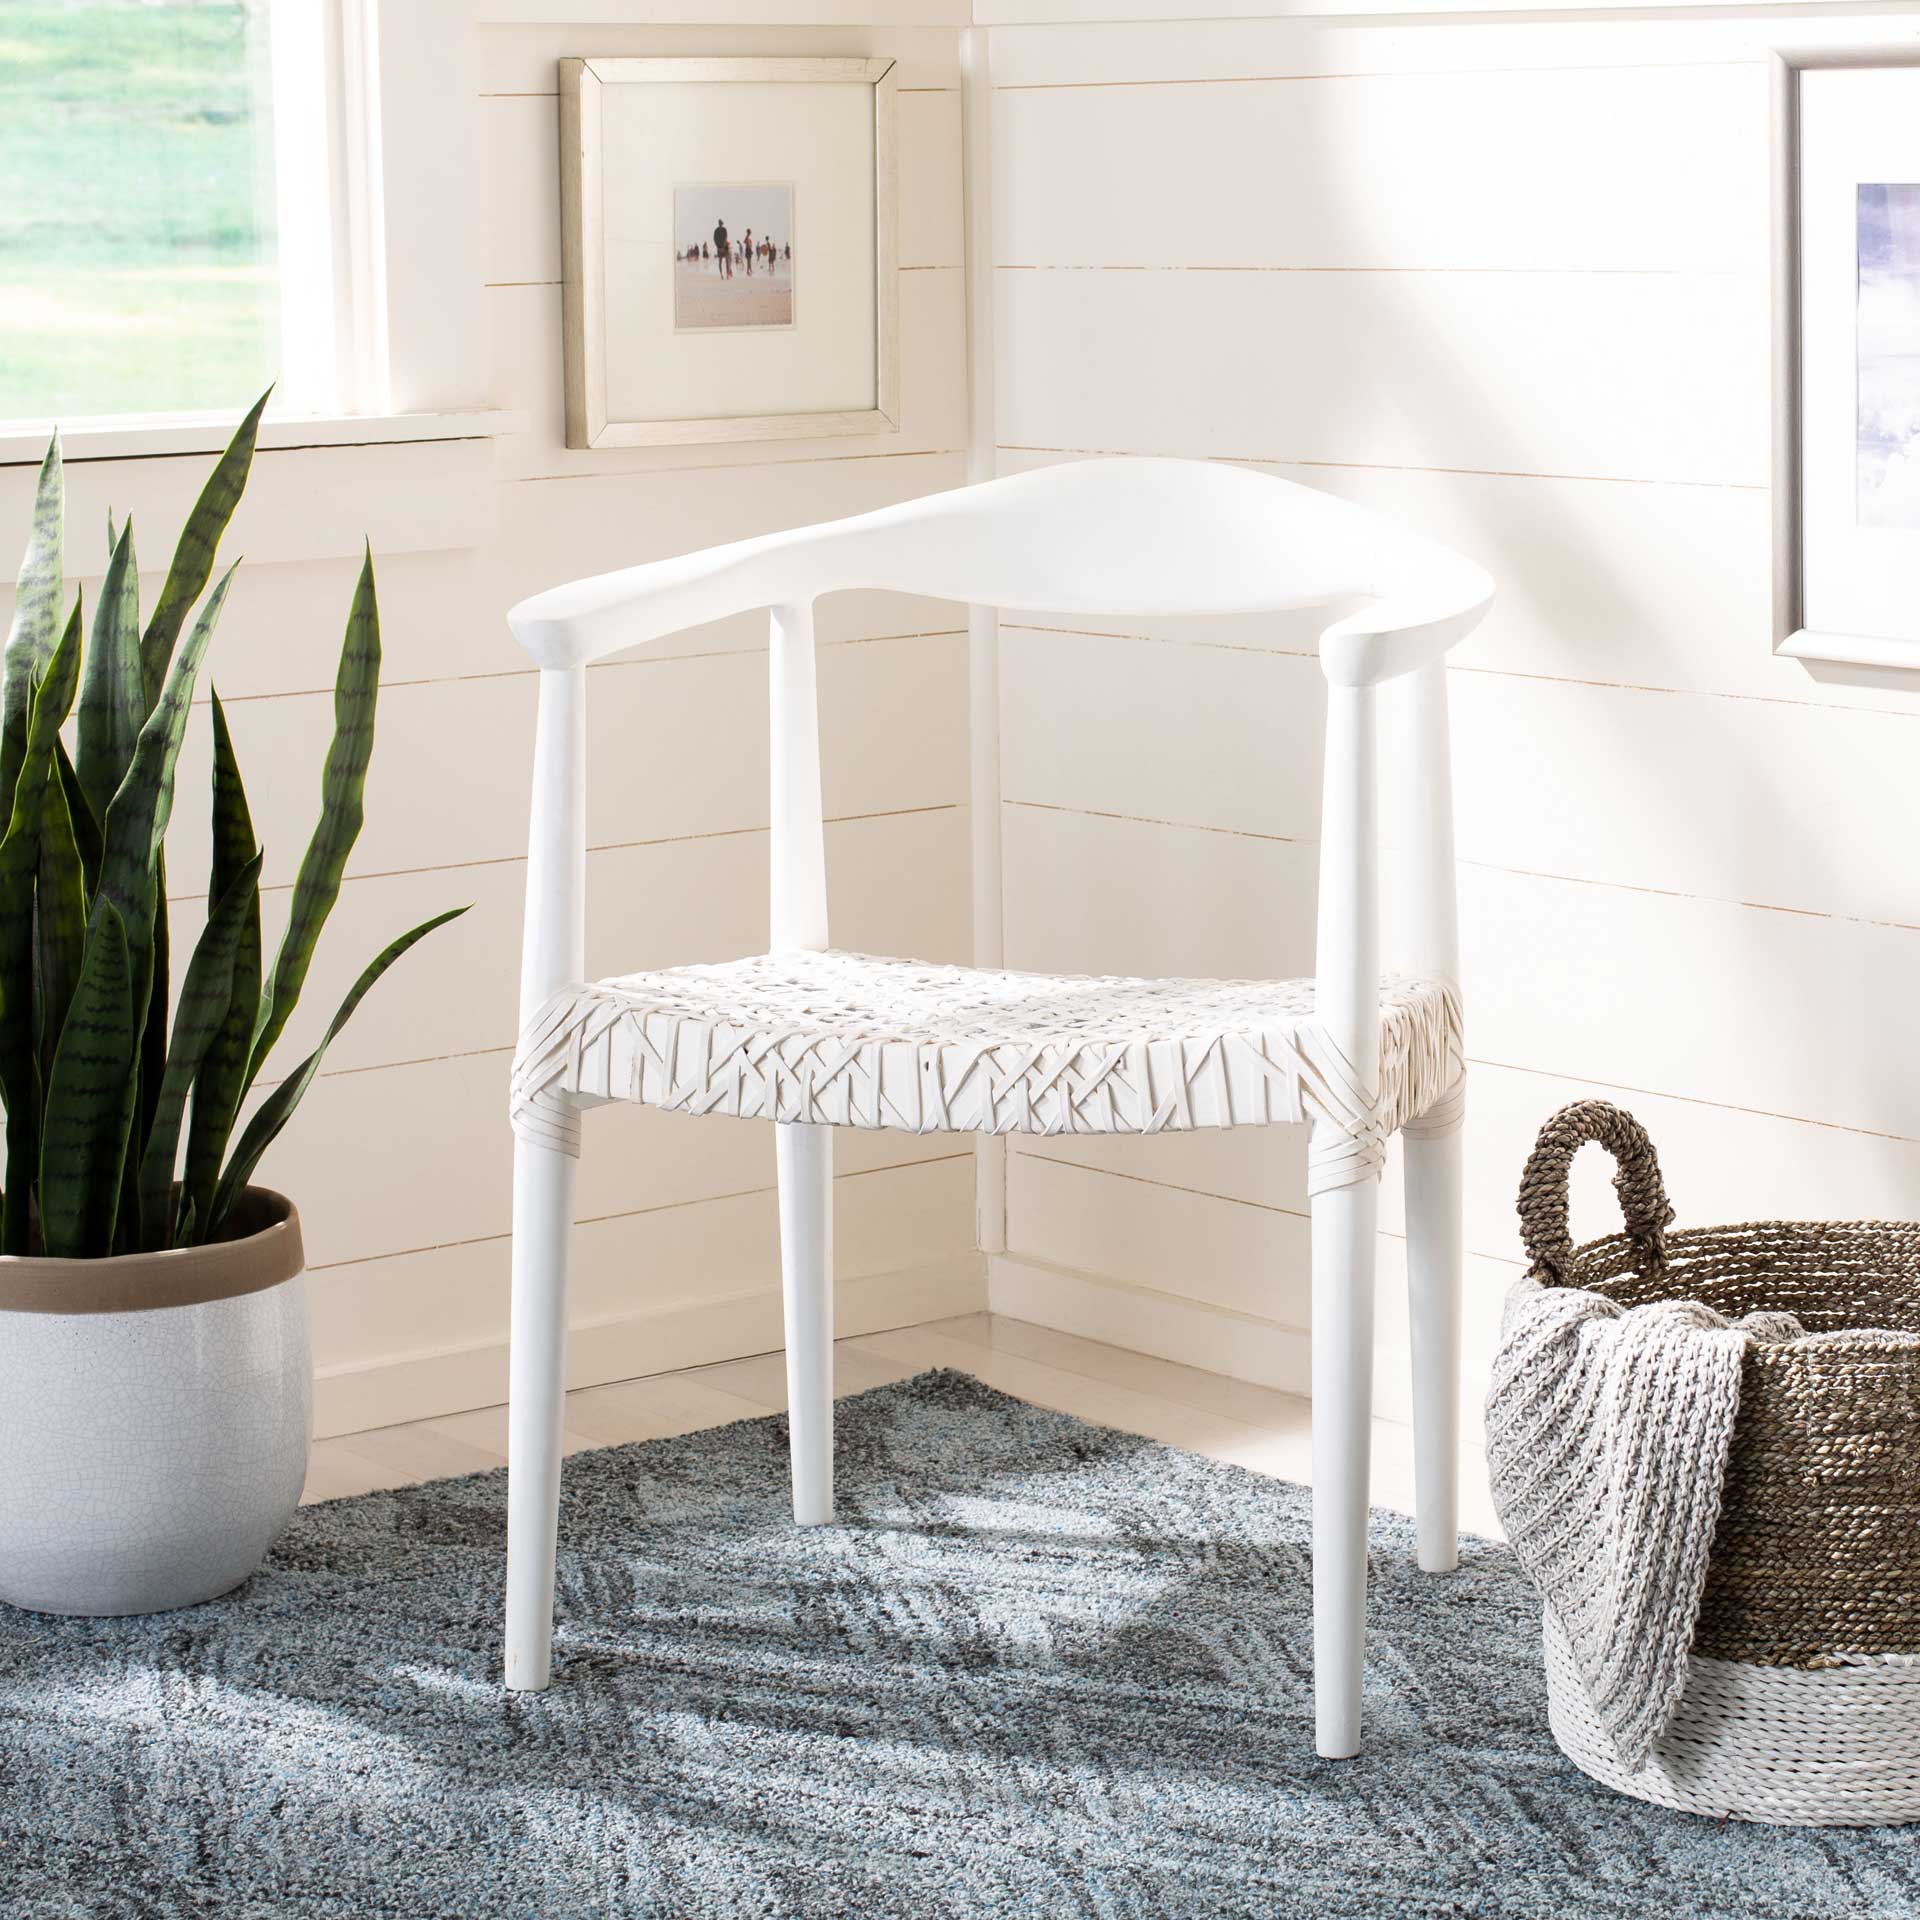 Justin Leather Woven Accent Chair White/Off-White